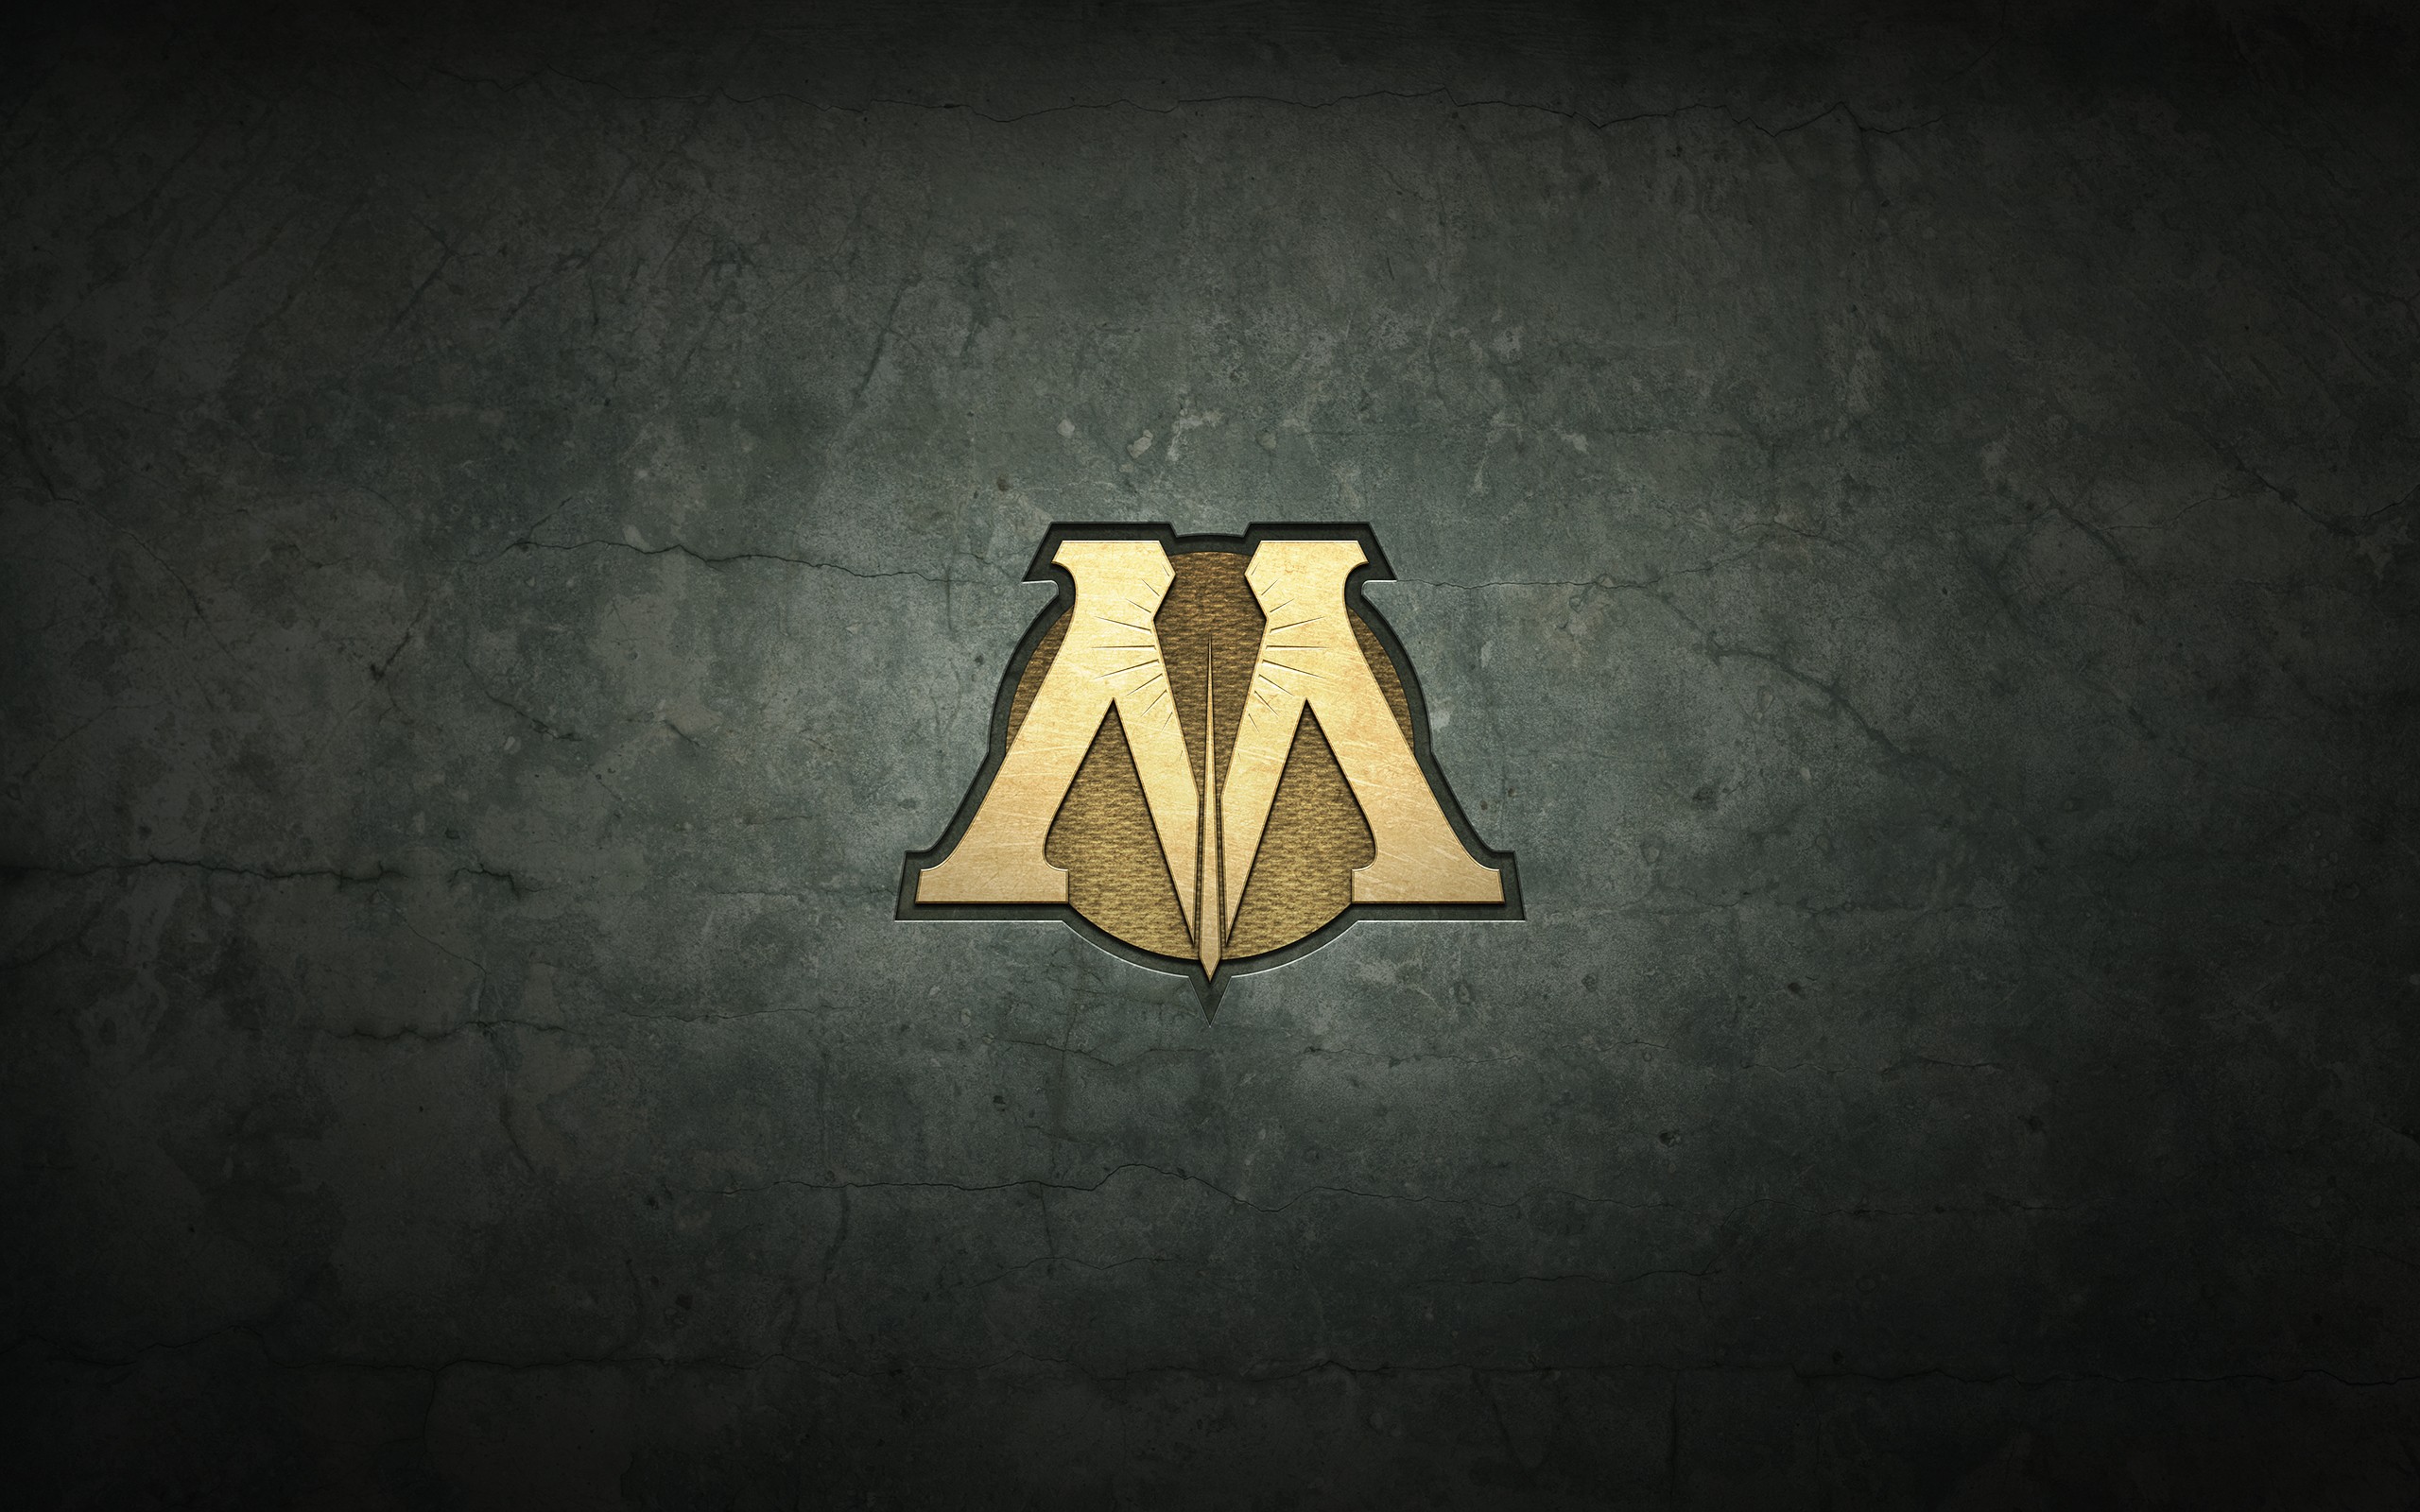 General 2560x1600 logo Harry Potter movies texture